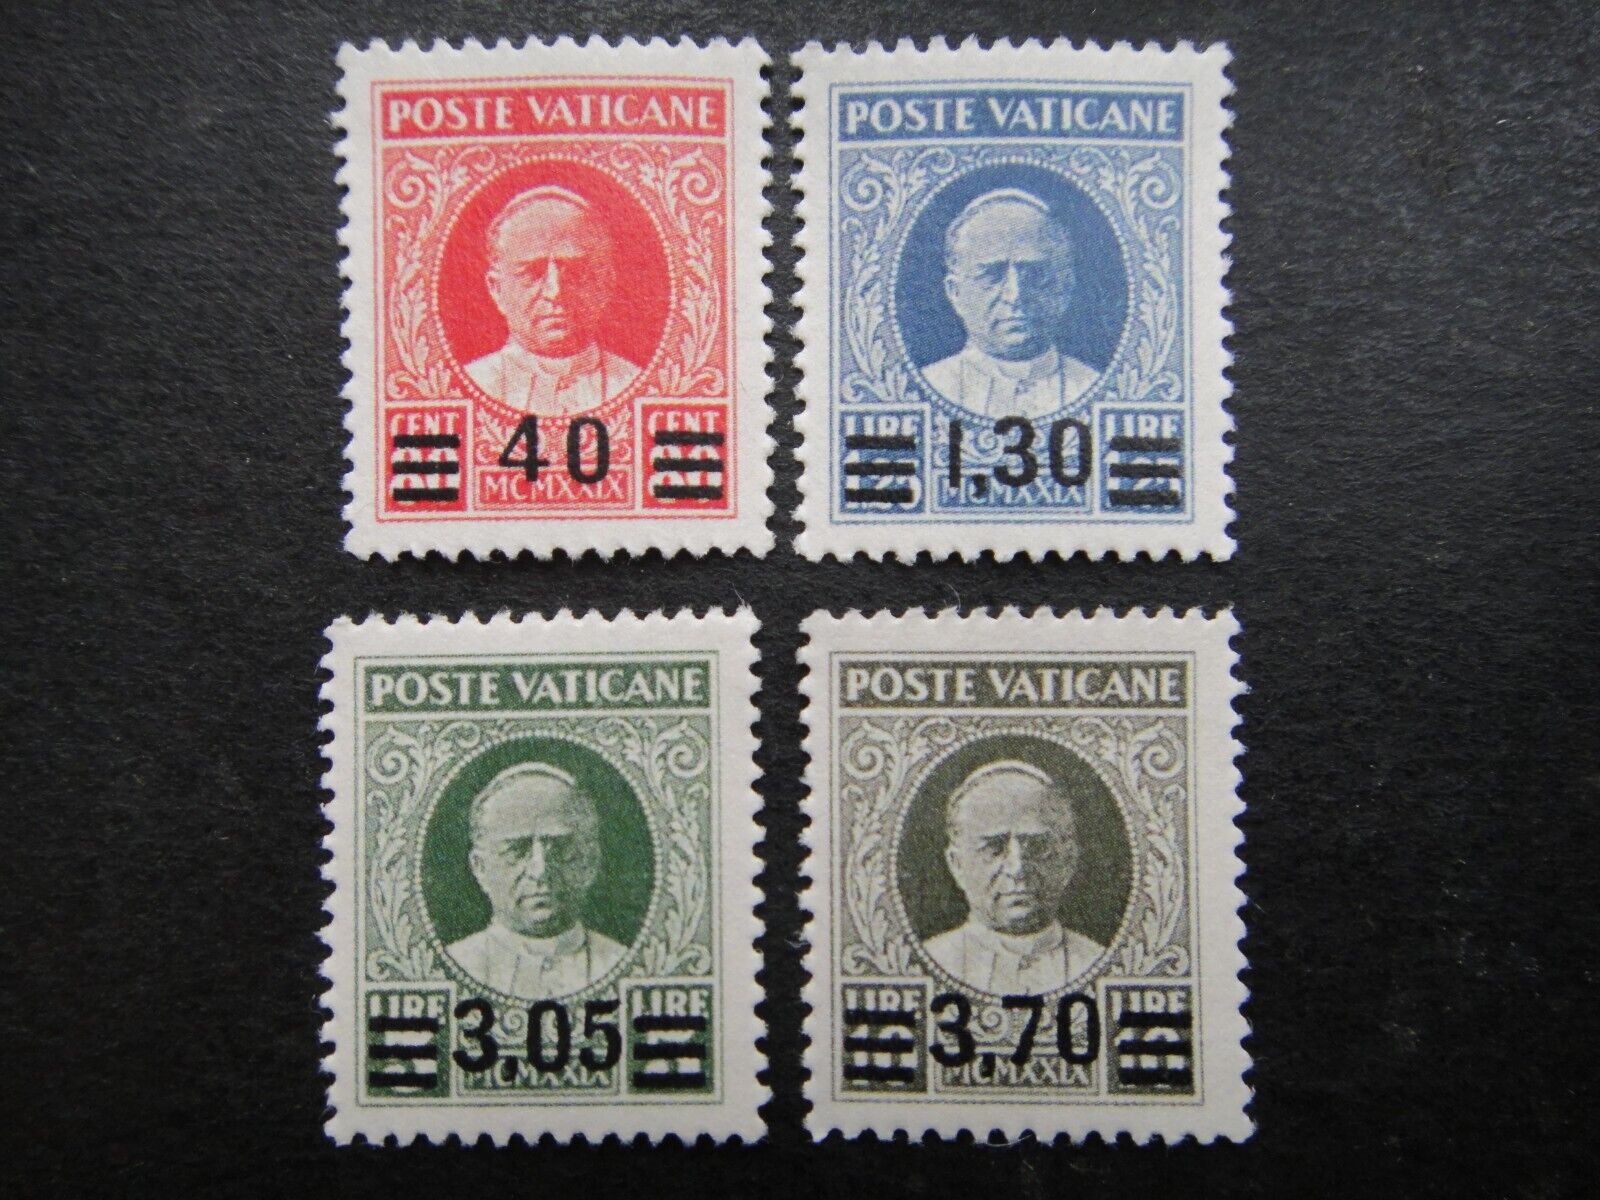 Italy 1934 Stamps MNH Vatican City Provvisoria Airmail